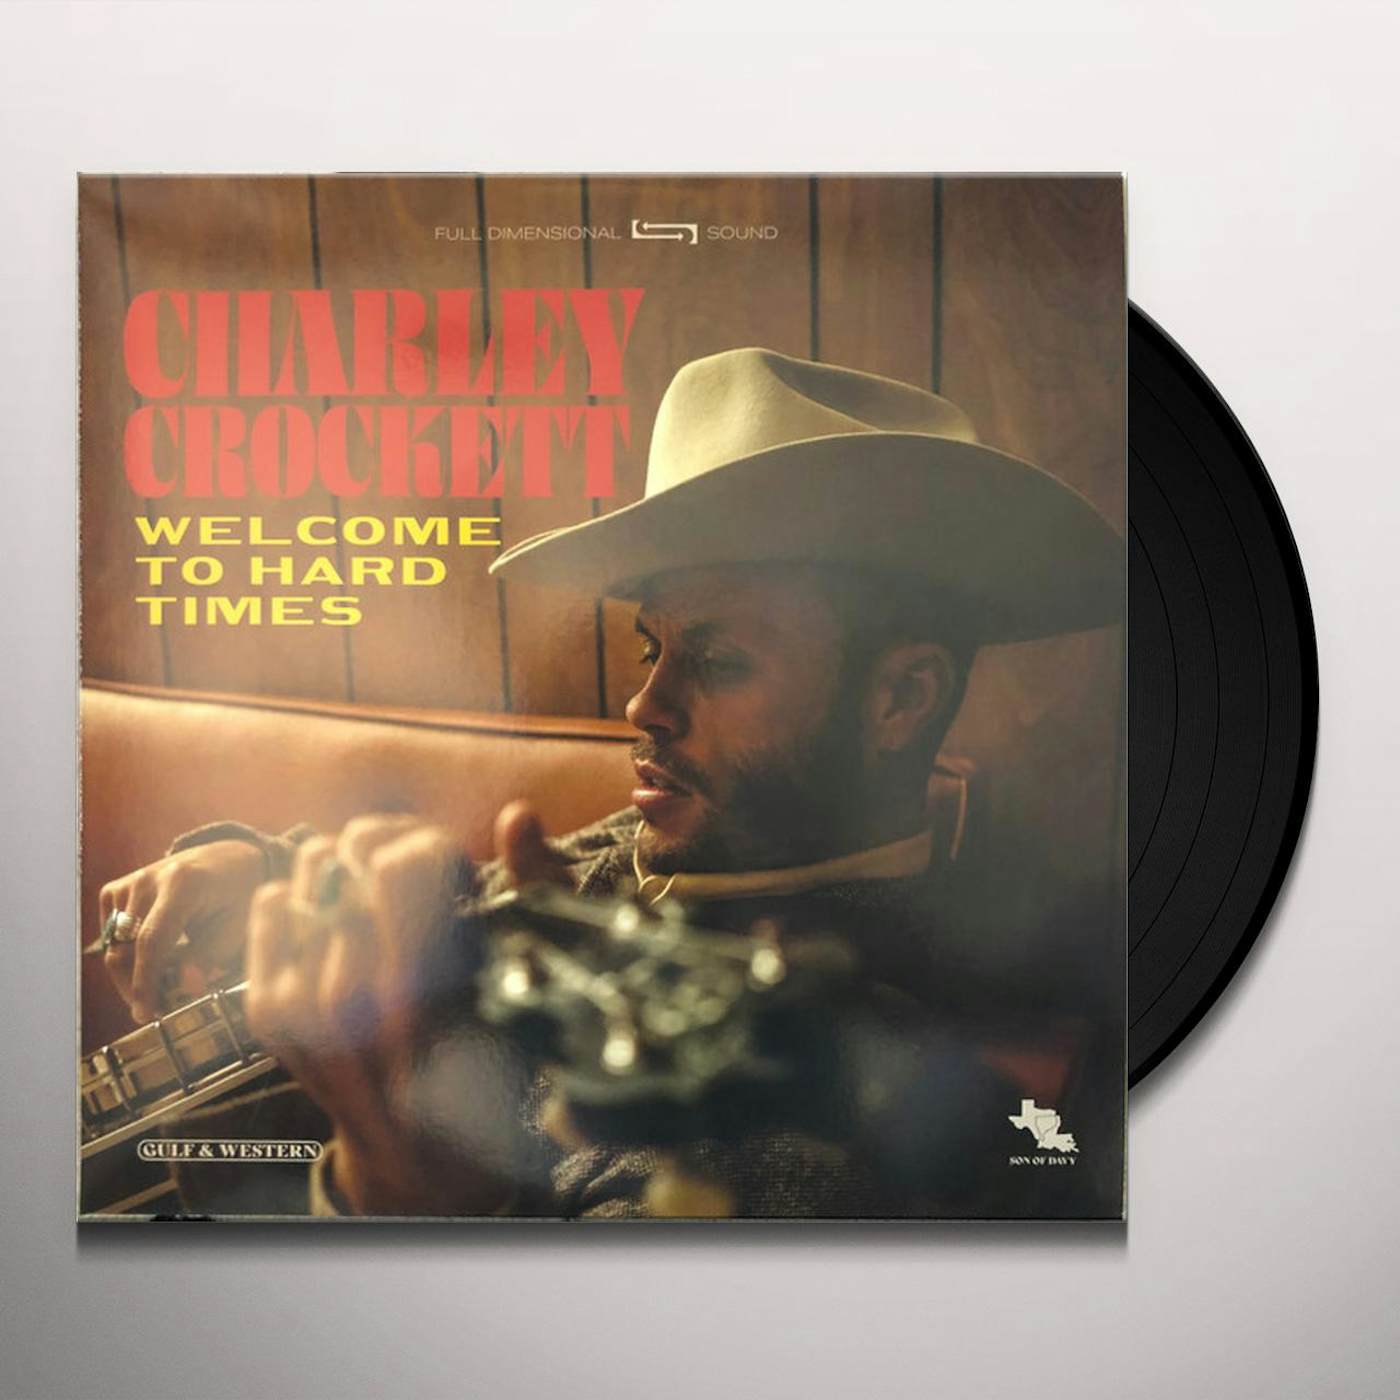 Charley Crockett Welcome to Hard Times Vinyl Record